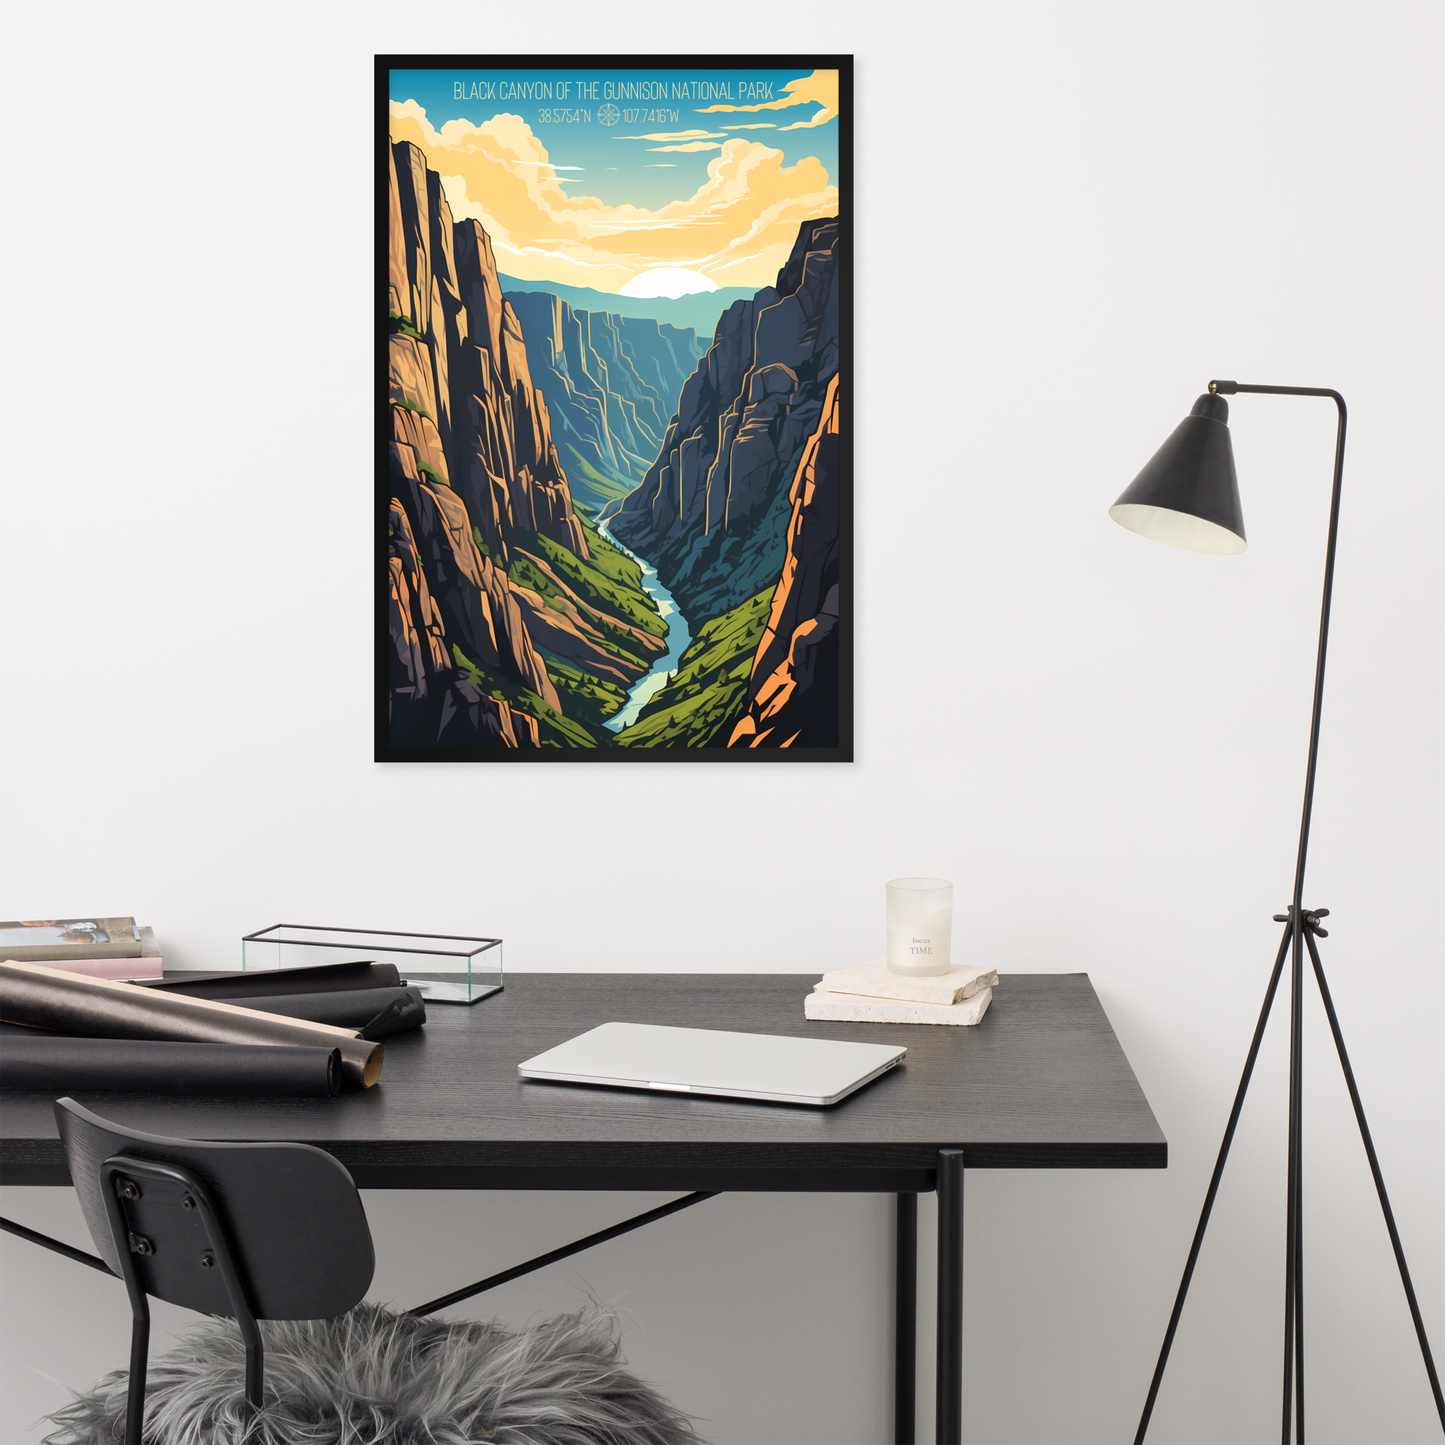 Colorado - Black Canyon of the Gunnison National Park (Framed poster)